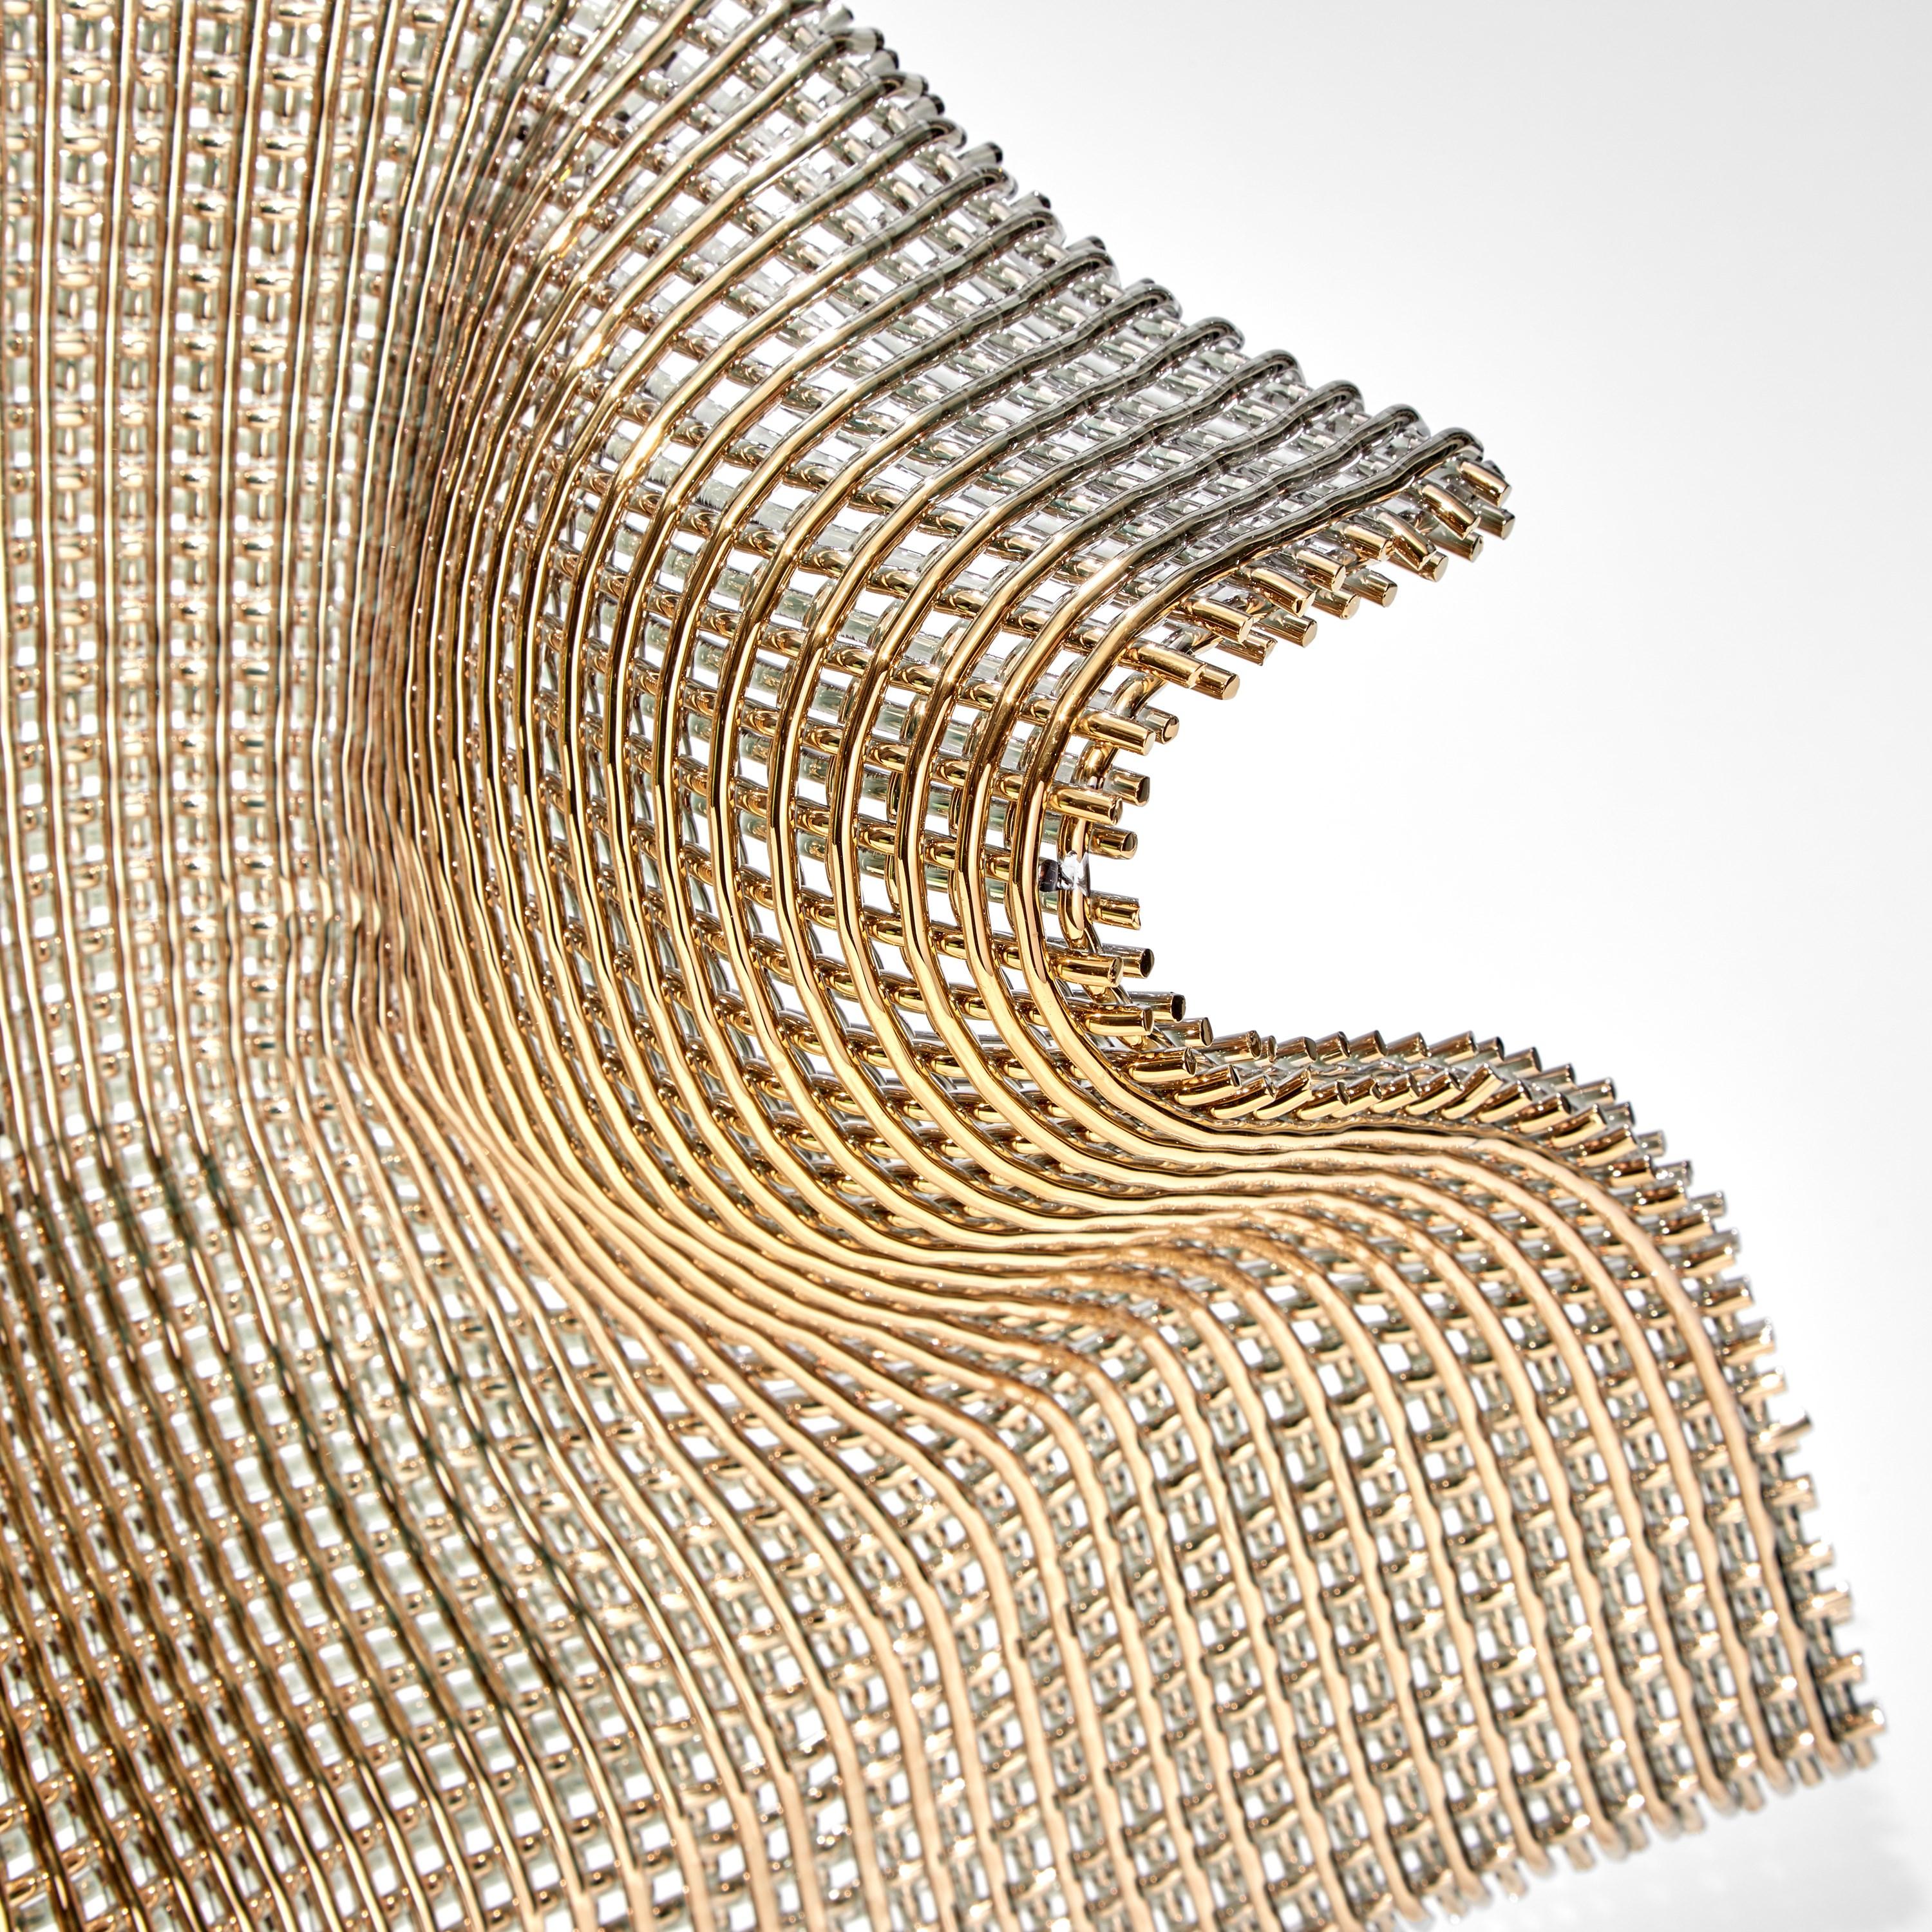 British Masquerade, a Golden Woven Glass Standing Sculpture by Cathryn Shilling